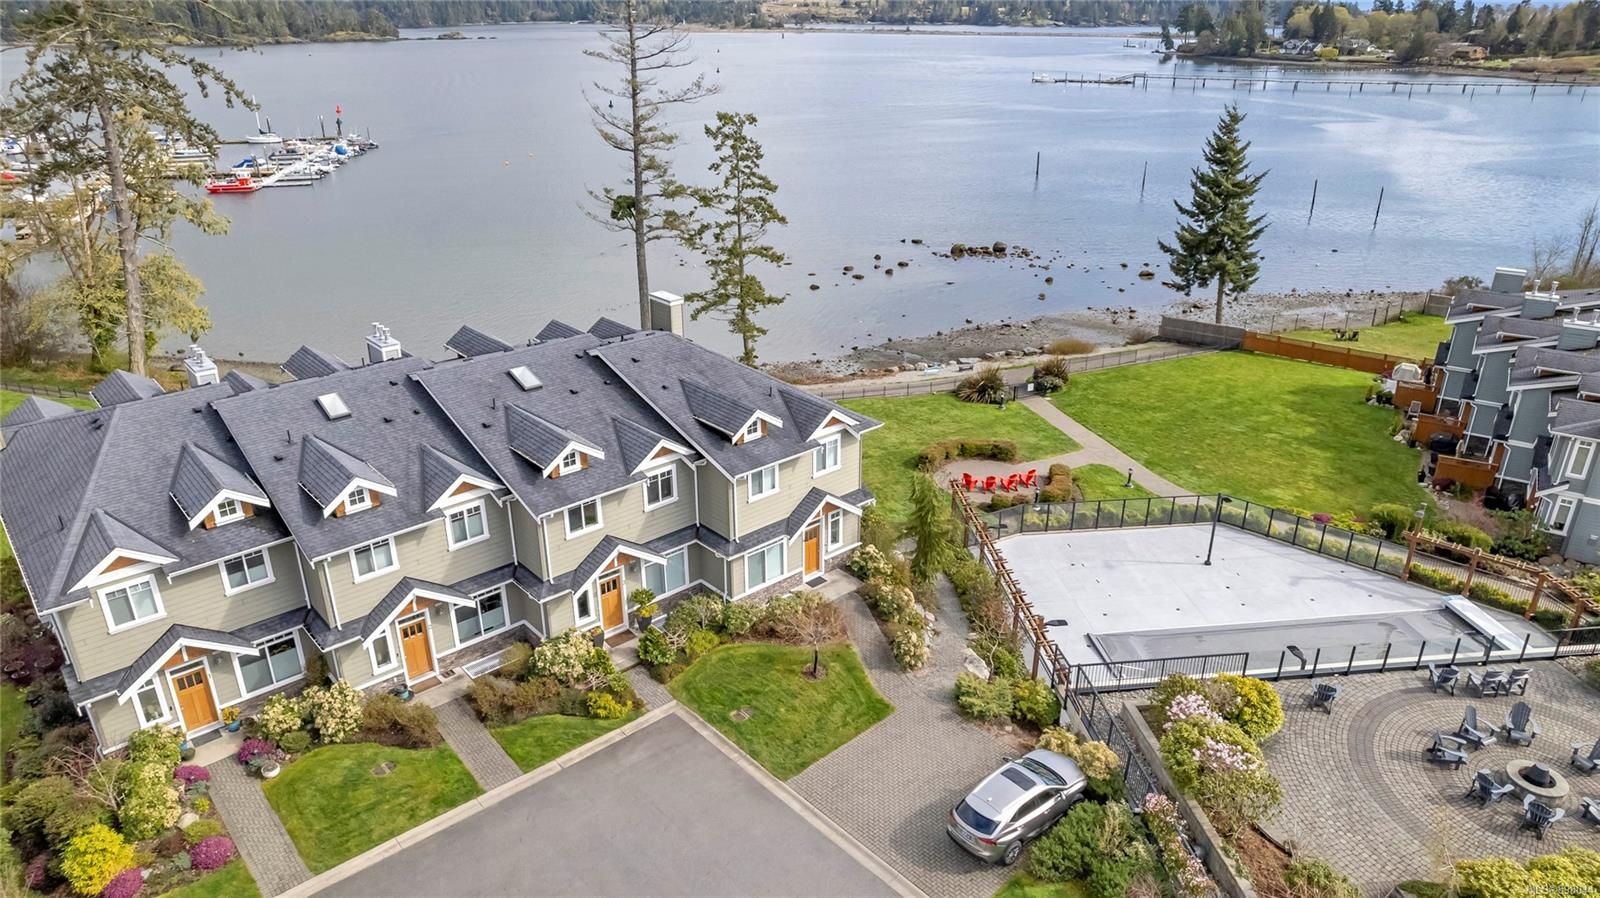 Open House. Open House on Sunday, June 26, 2022 1:00PM - 3:00PM
Oceanfront Sooke Townhouse with 4 bedrooms and 4 bathrooms and all the amenities you can imagine. Open house this Saturday from 1-3. Priced to sell so Come see your new Waterfront home in Soo